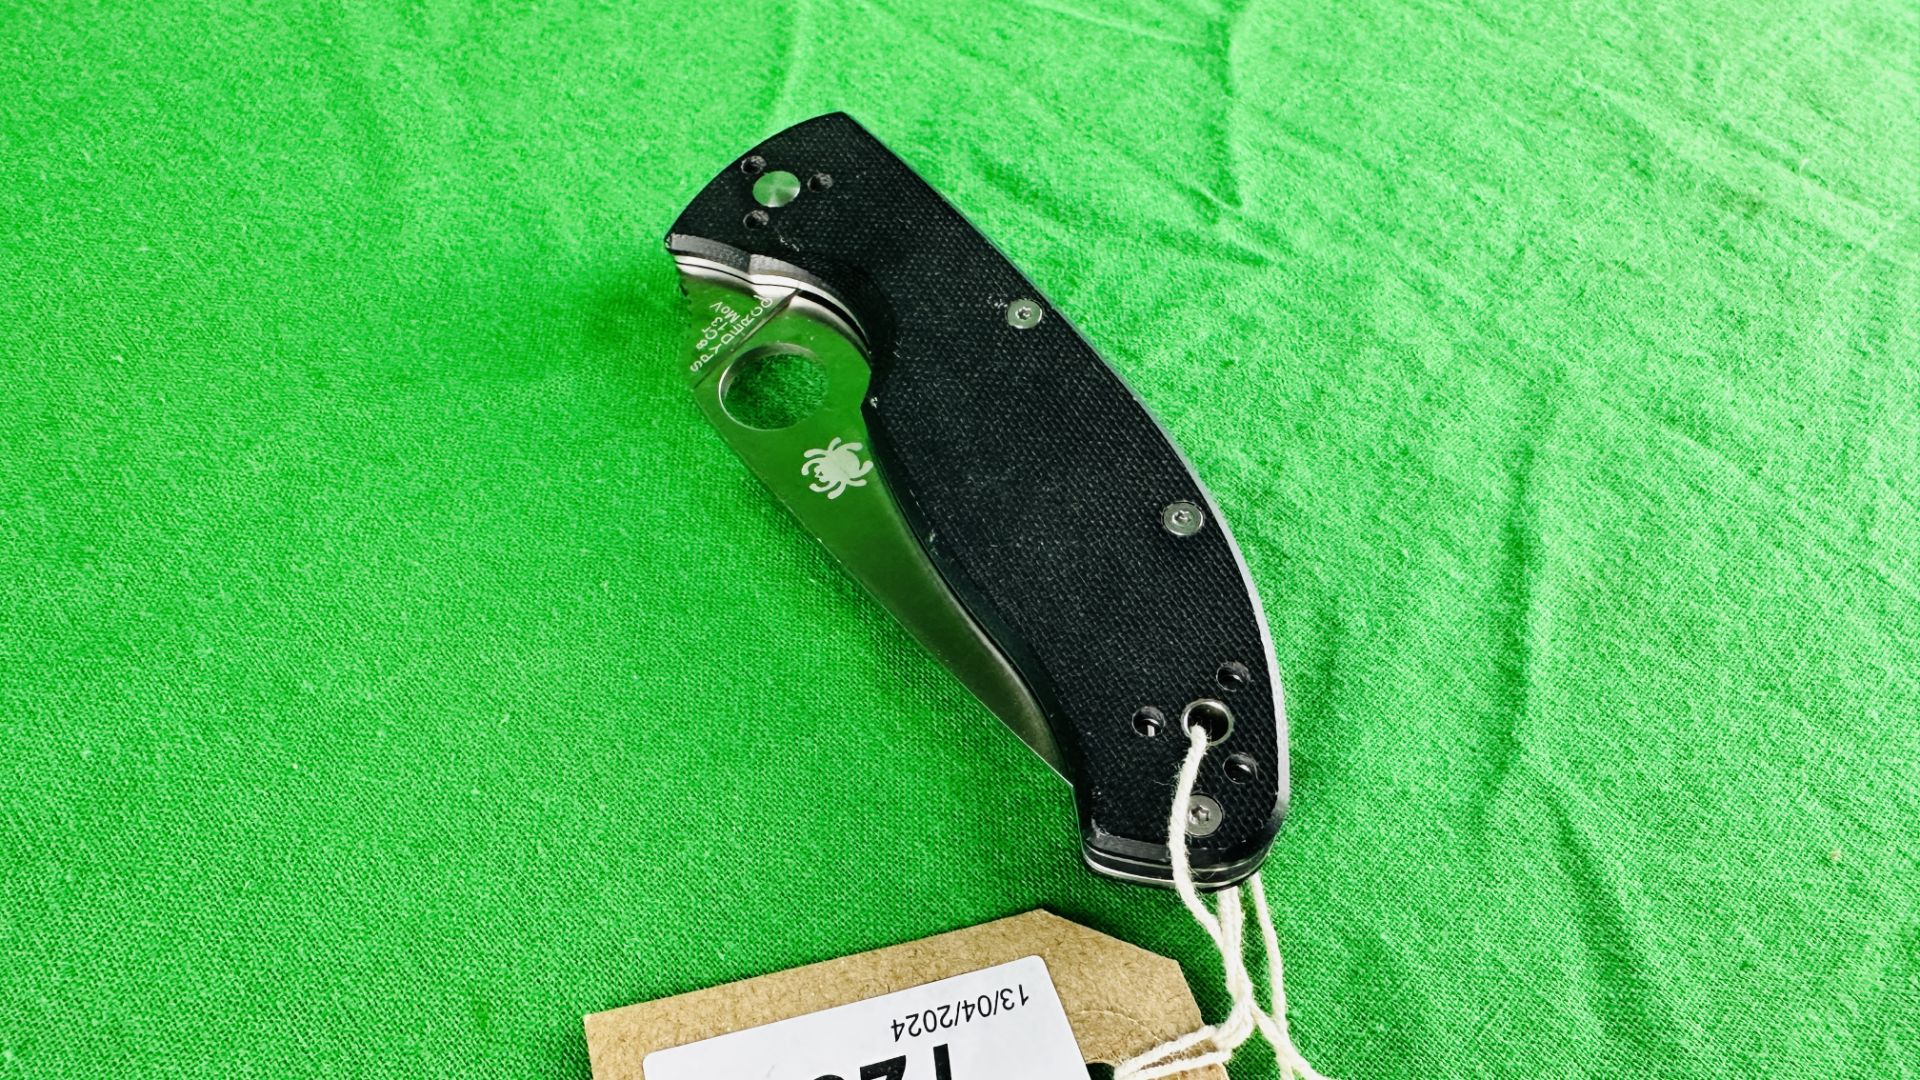 SPYDERCO TENACIOUS C122GP FOLDING POCKET LOCK KNIFE - NO POSTAGE OR PACKING AVAILABLE - Image 7 of 7